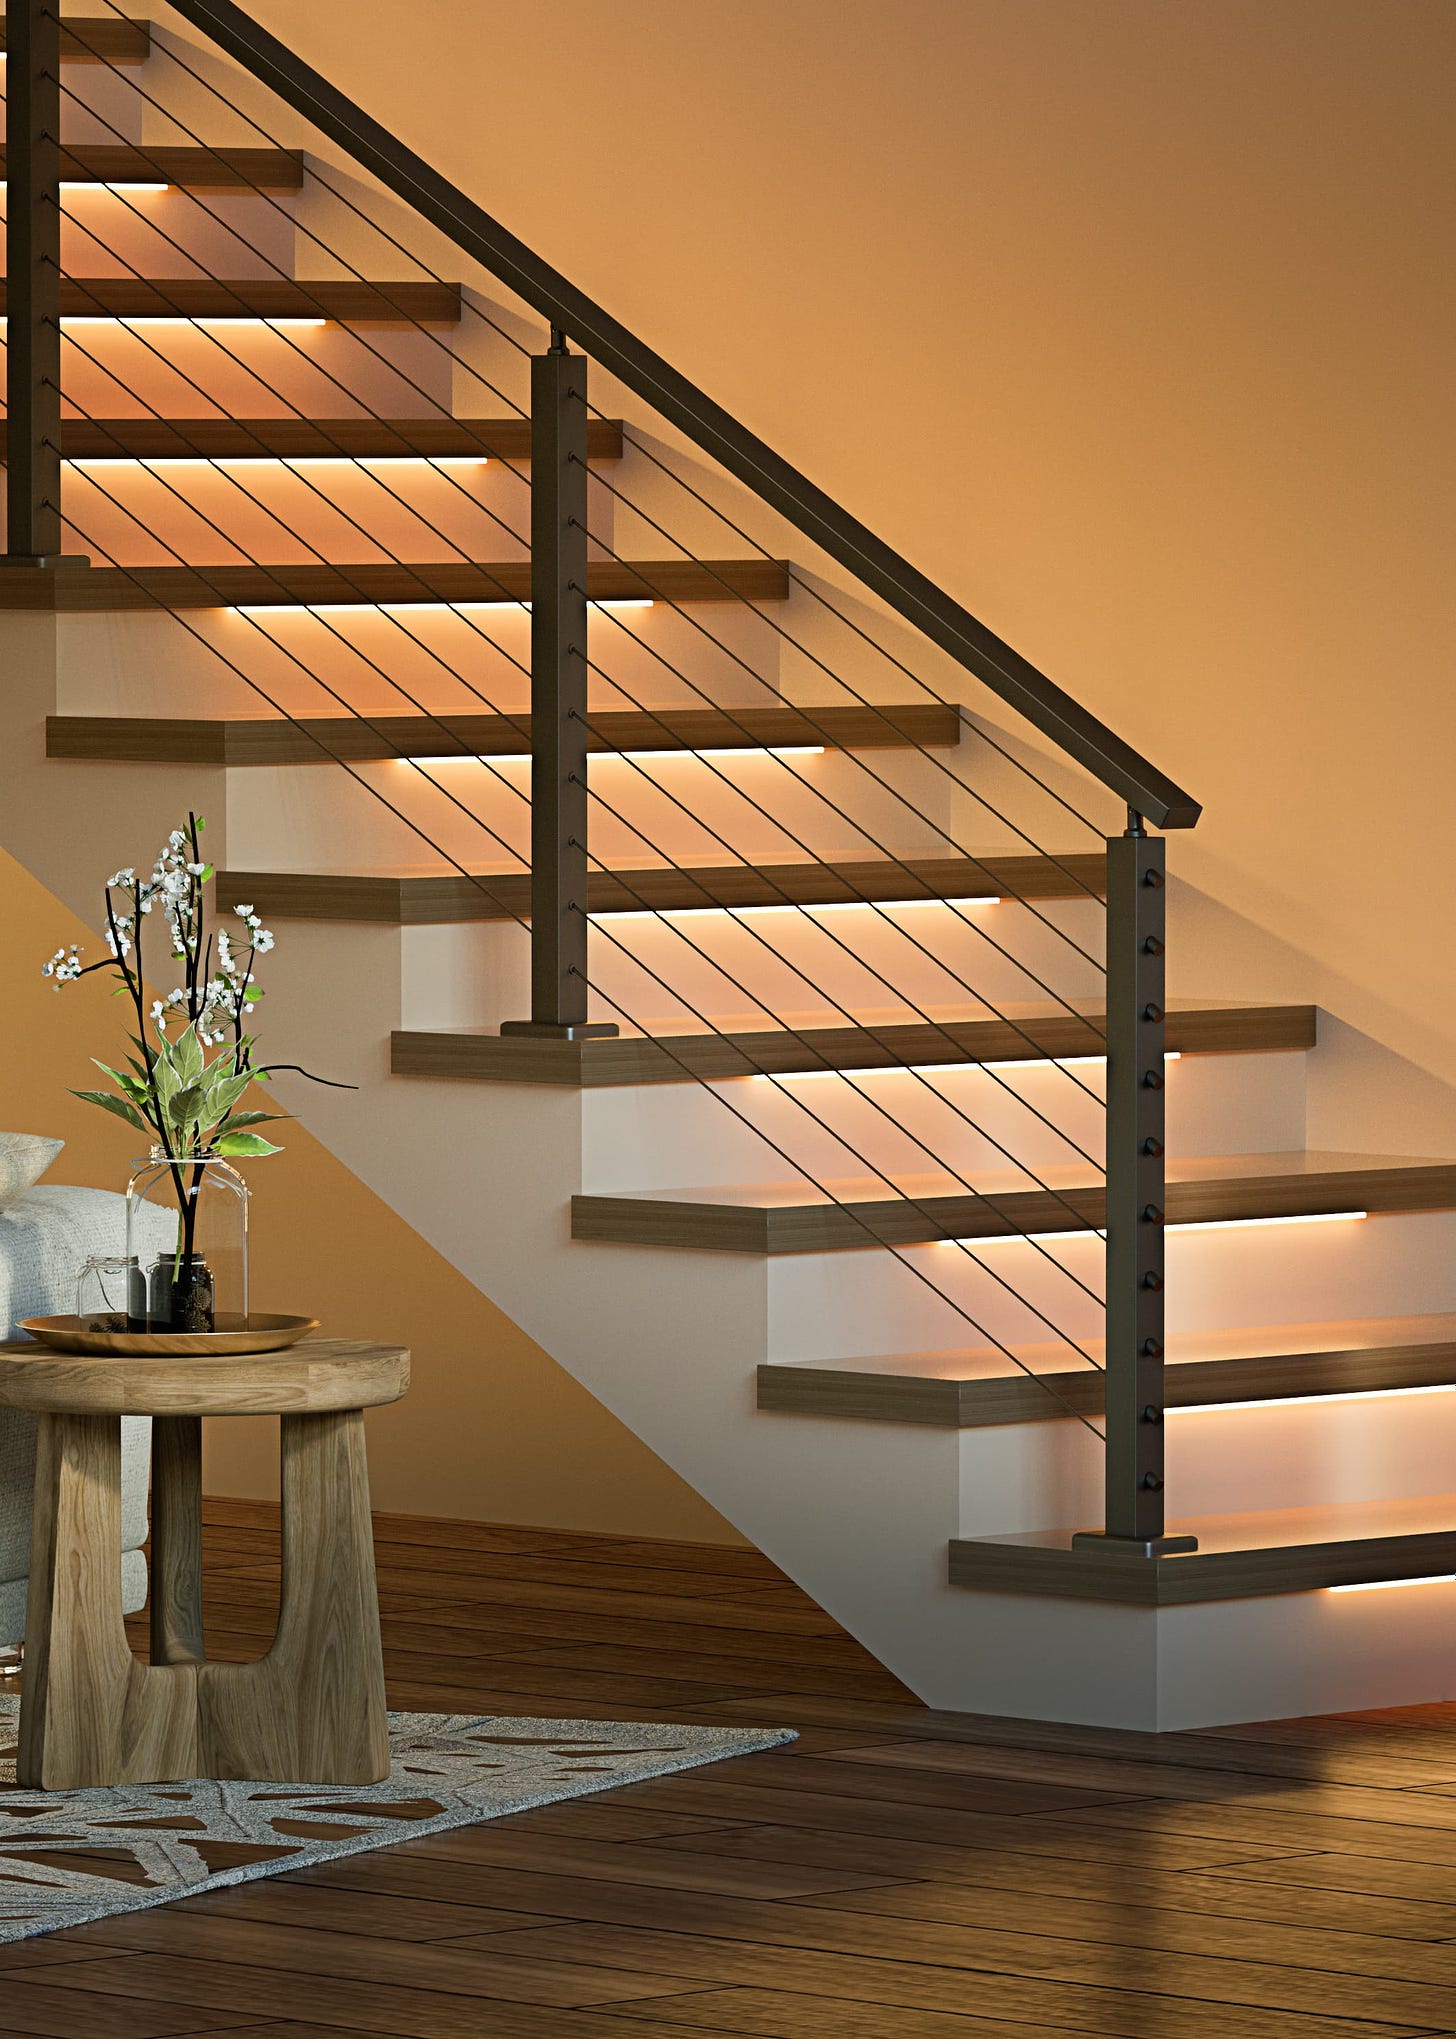 Paired With Step Lights, The Muzata Cable Railing System Creates A Stunning Lighting Effect